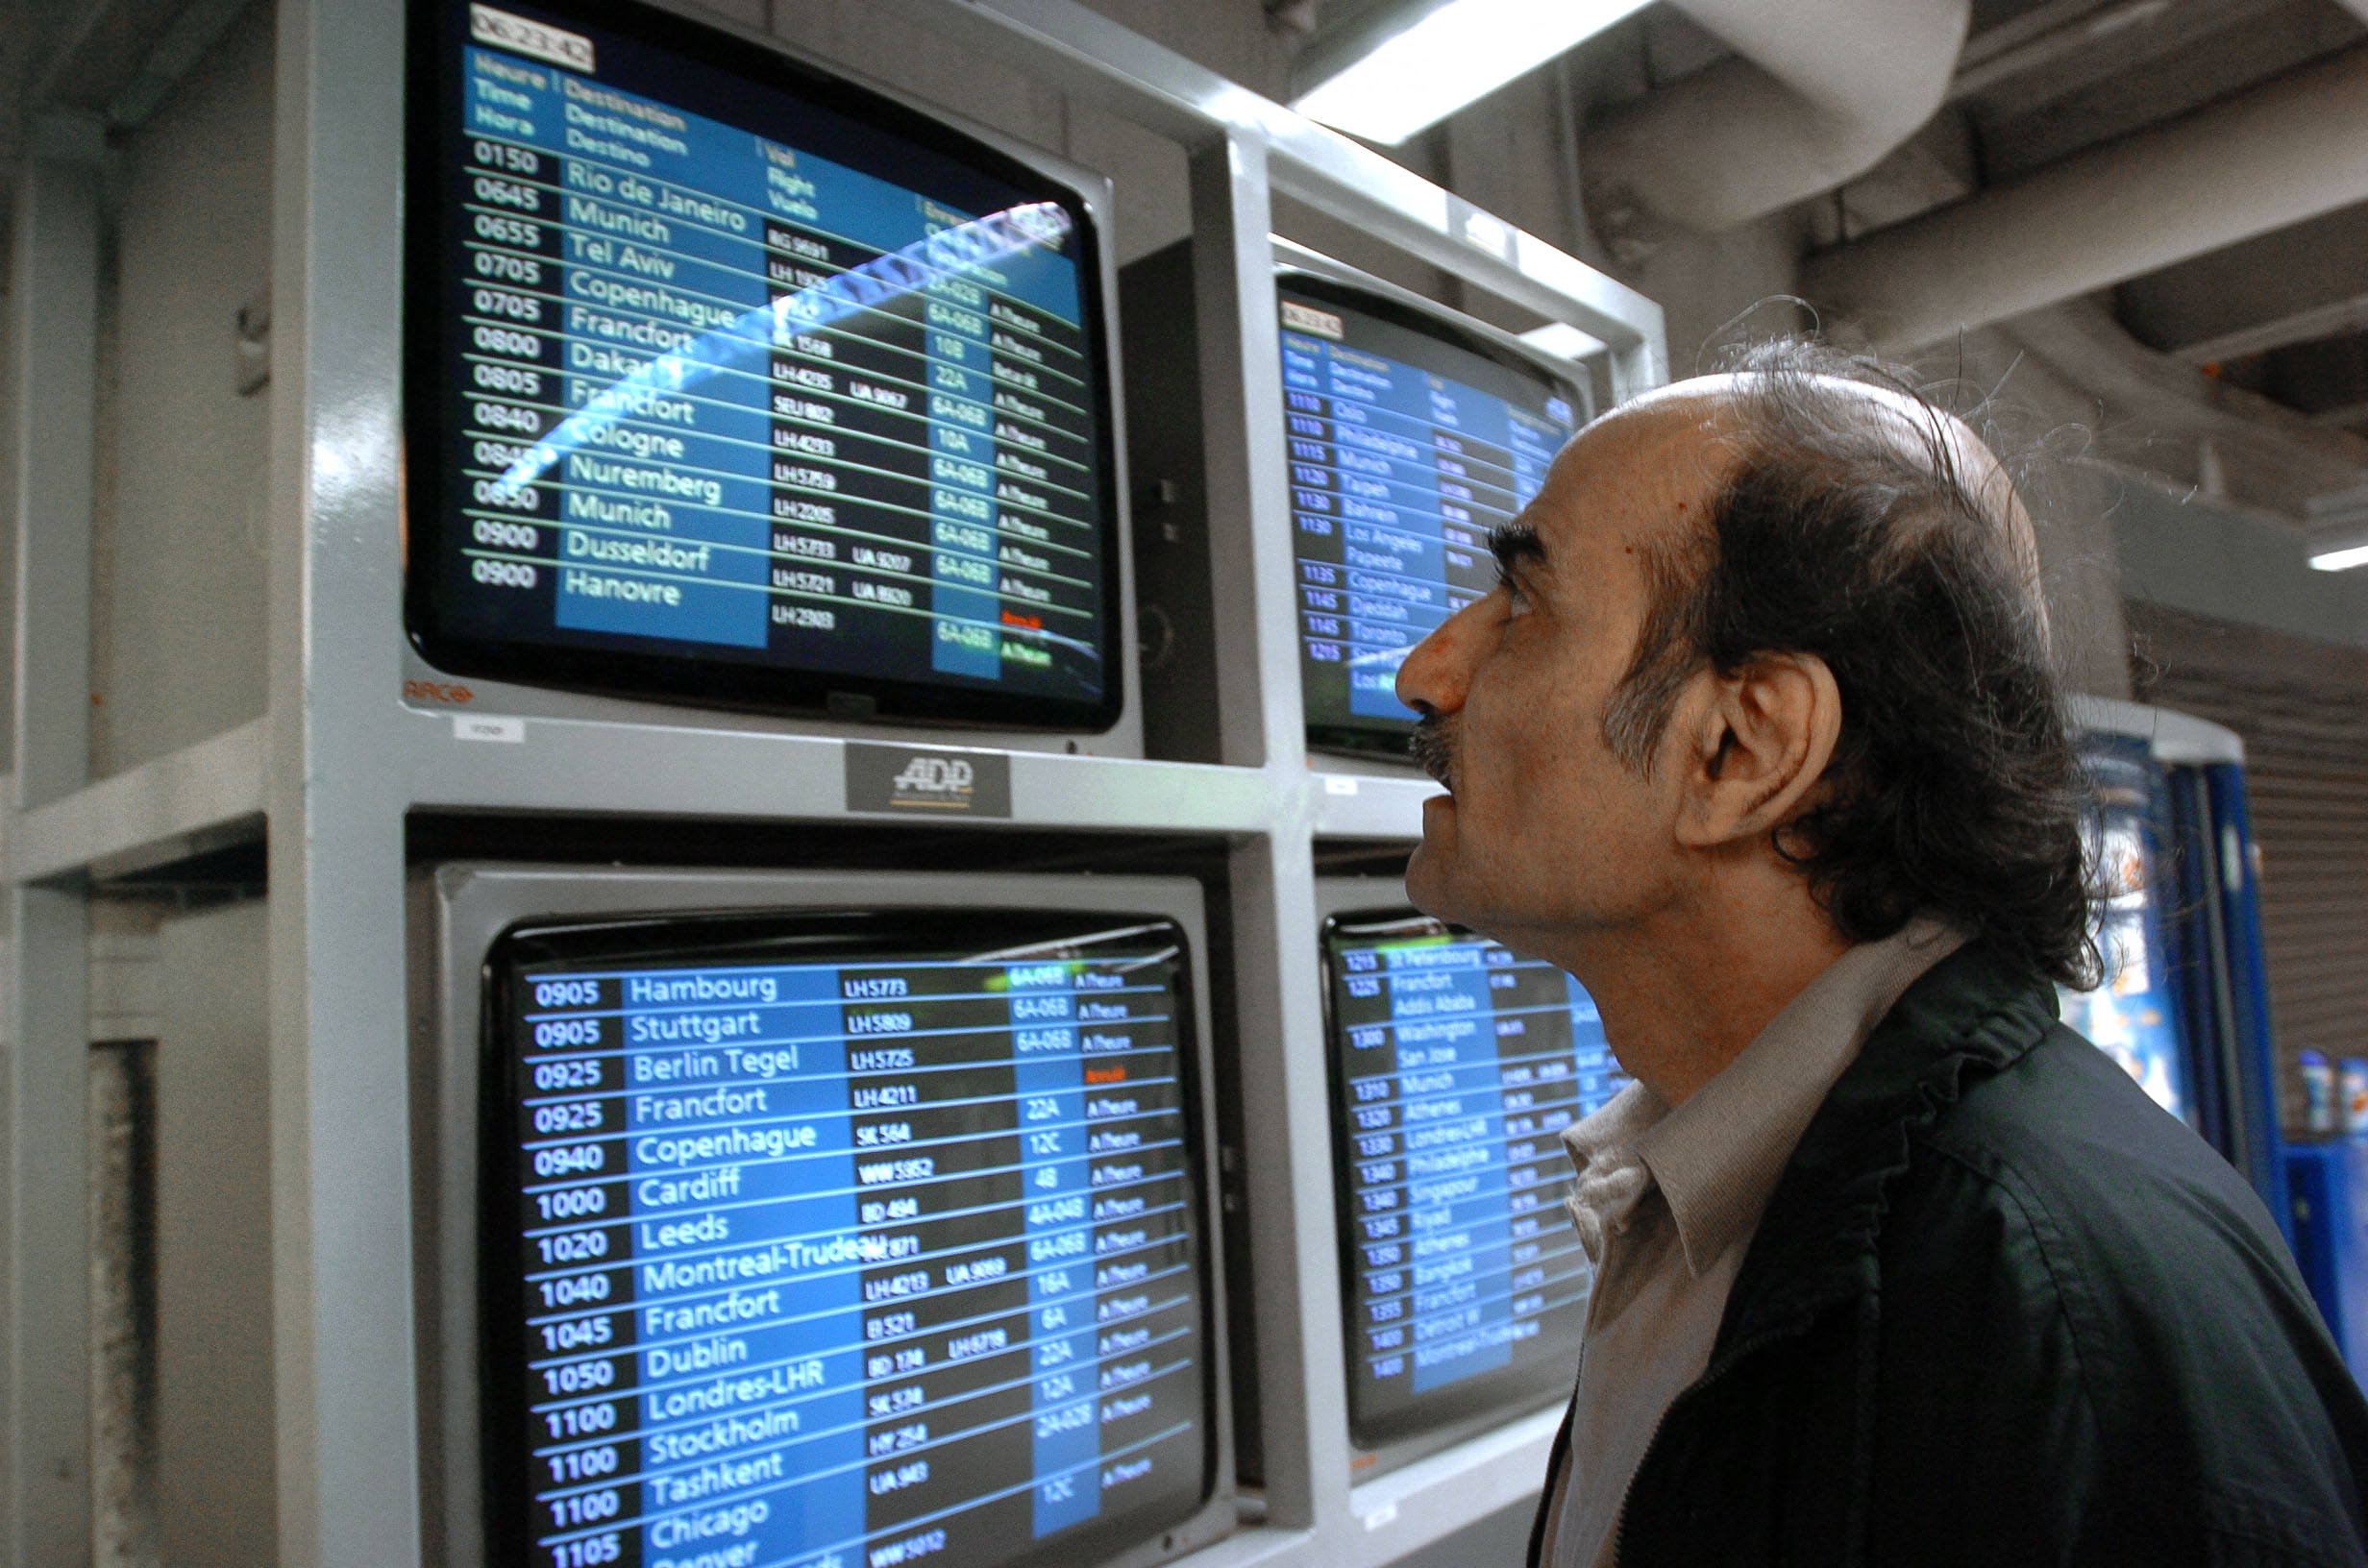 Iranian Man Who Inspired 2004 Movie The Terminal Dies in Paris Airport